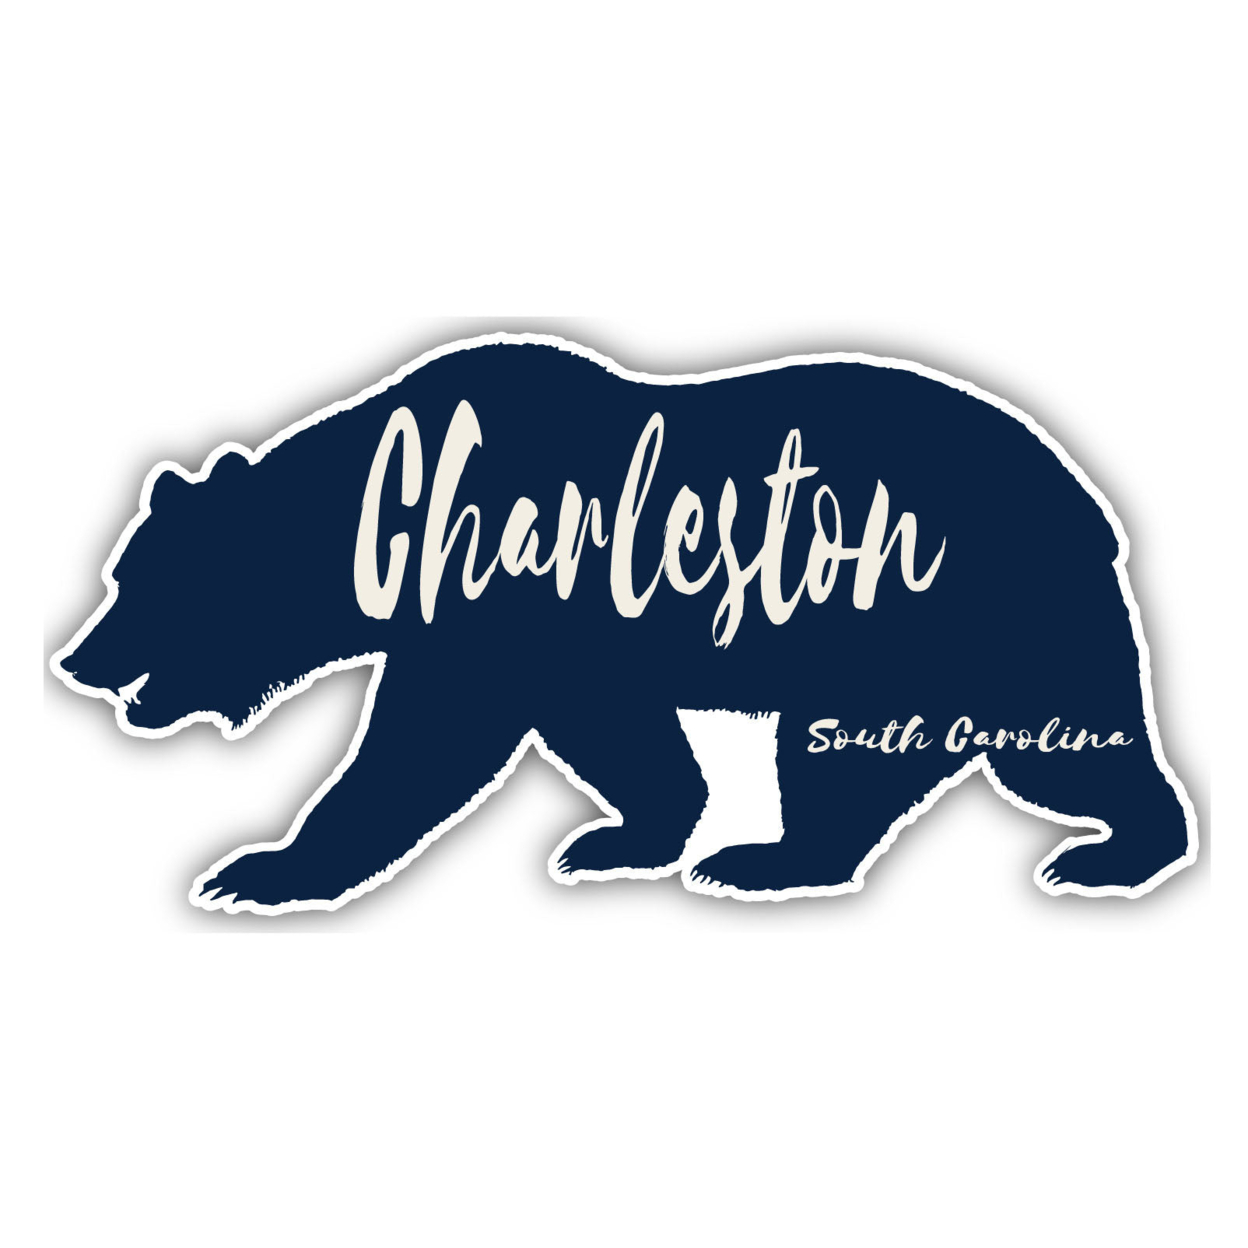 Charleston South Carolina Souvenir Decorative Stickers (Choose Theme And Size) - 4-Pack, 4-Inch, Tent